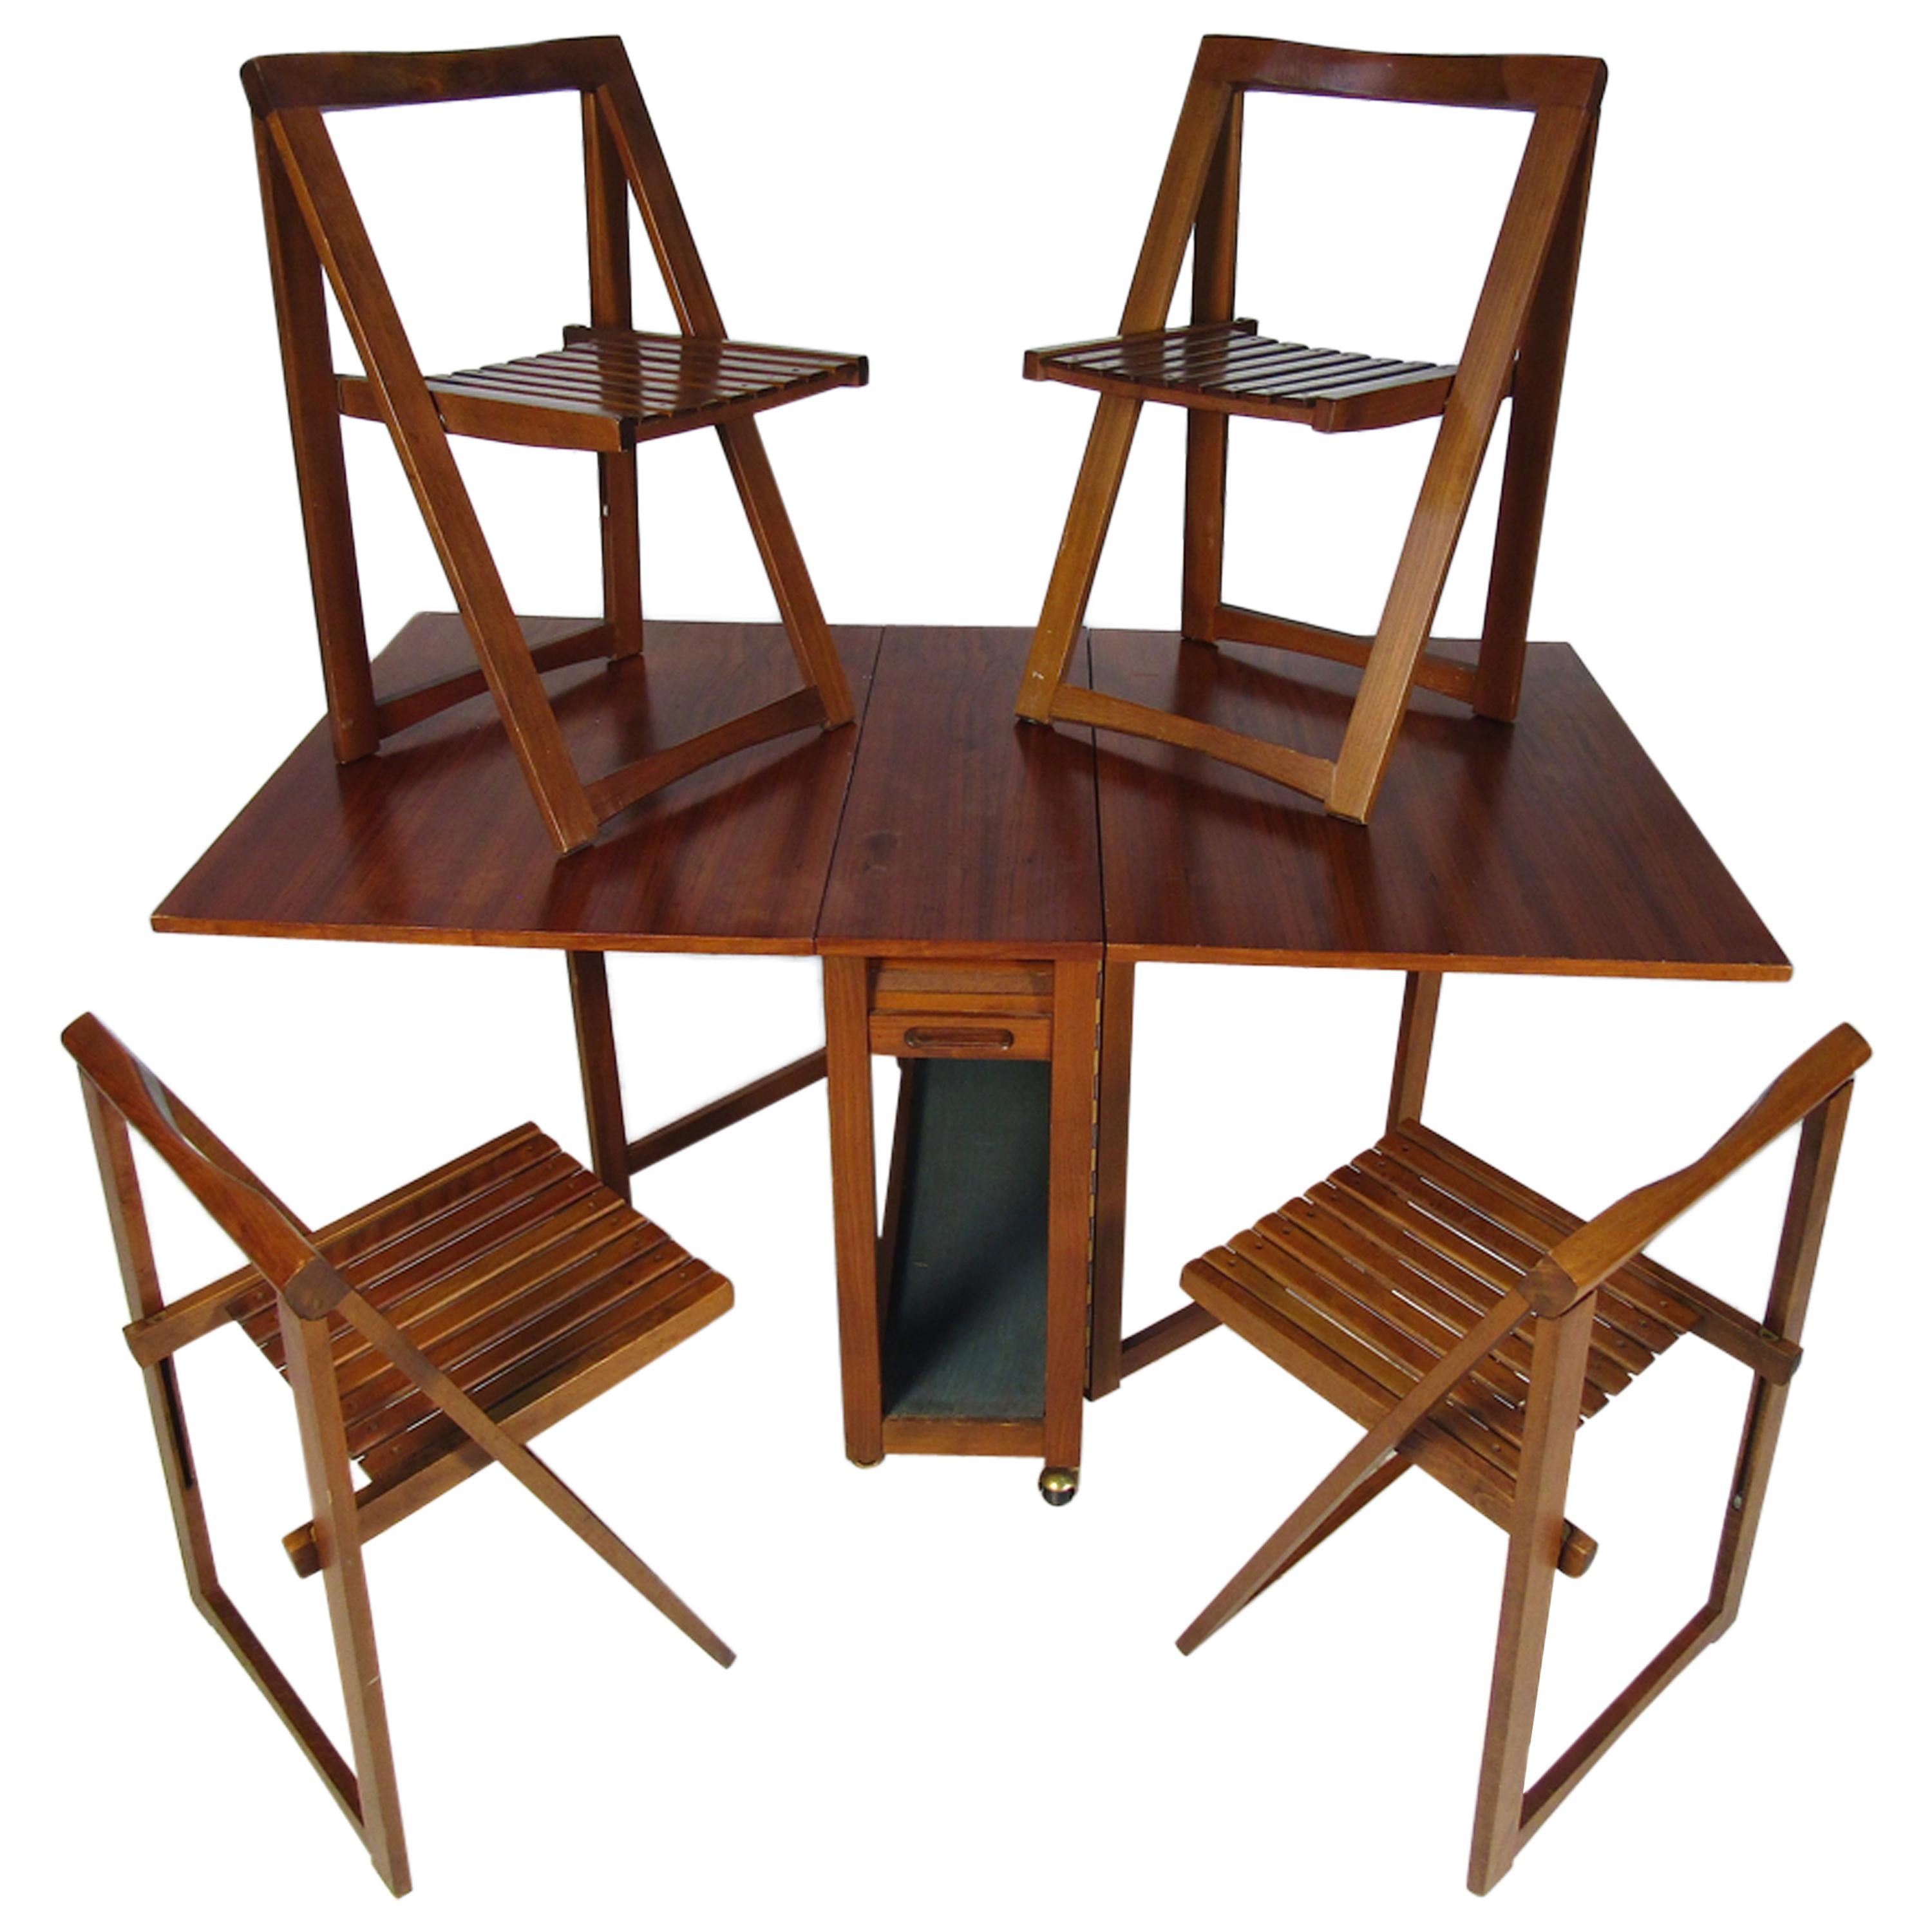 Midcentury Drop-Leaf Table with Storable Matching Chairs